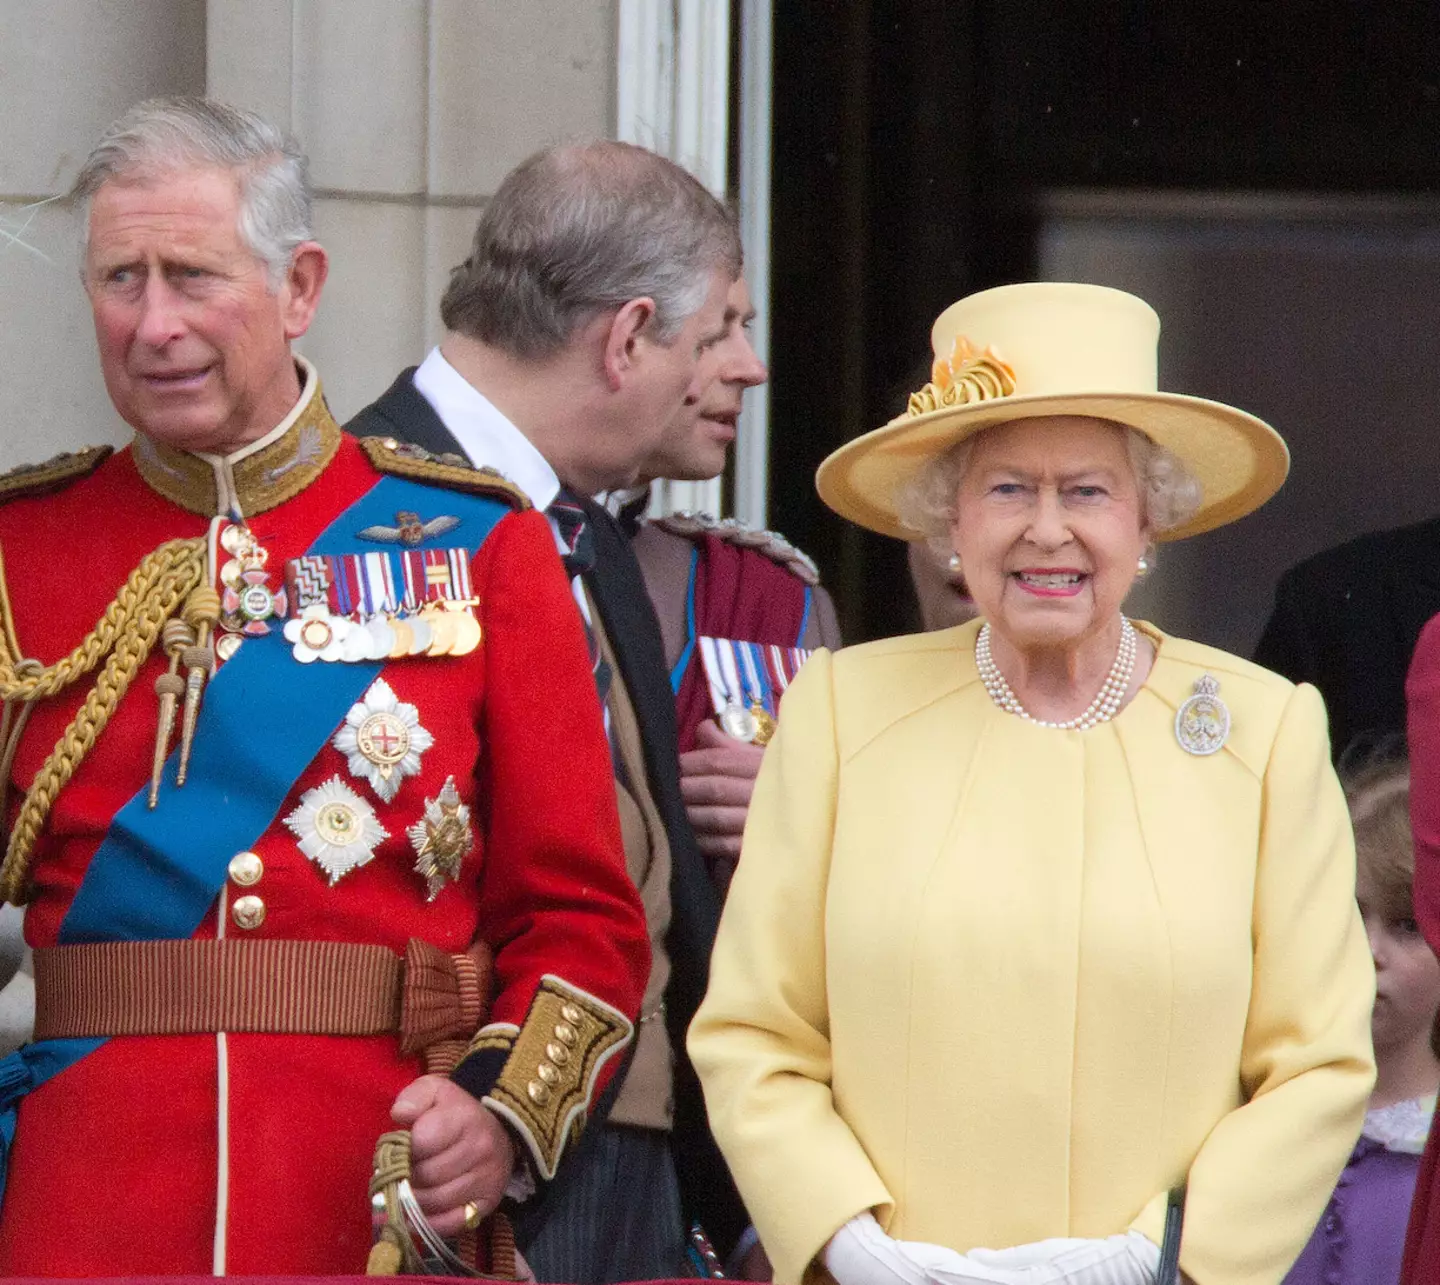 King Charles has addressed the nation in the wake of Queen Elizabeth II’s death.